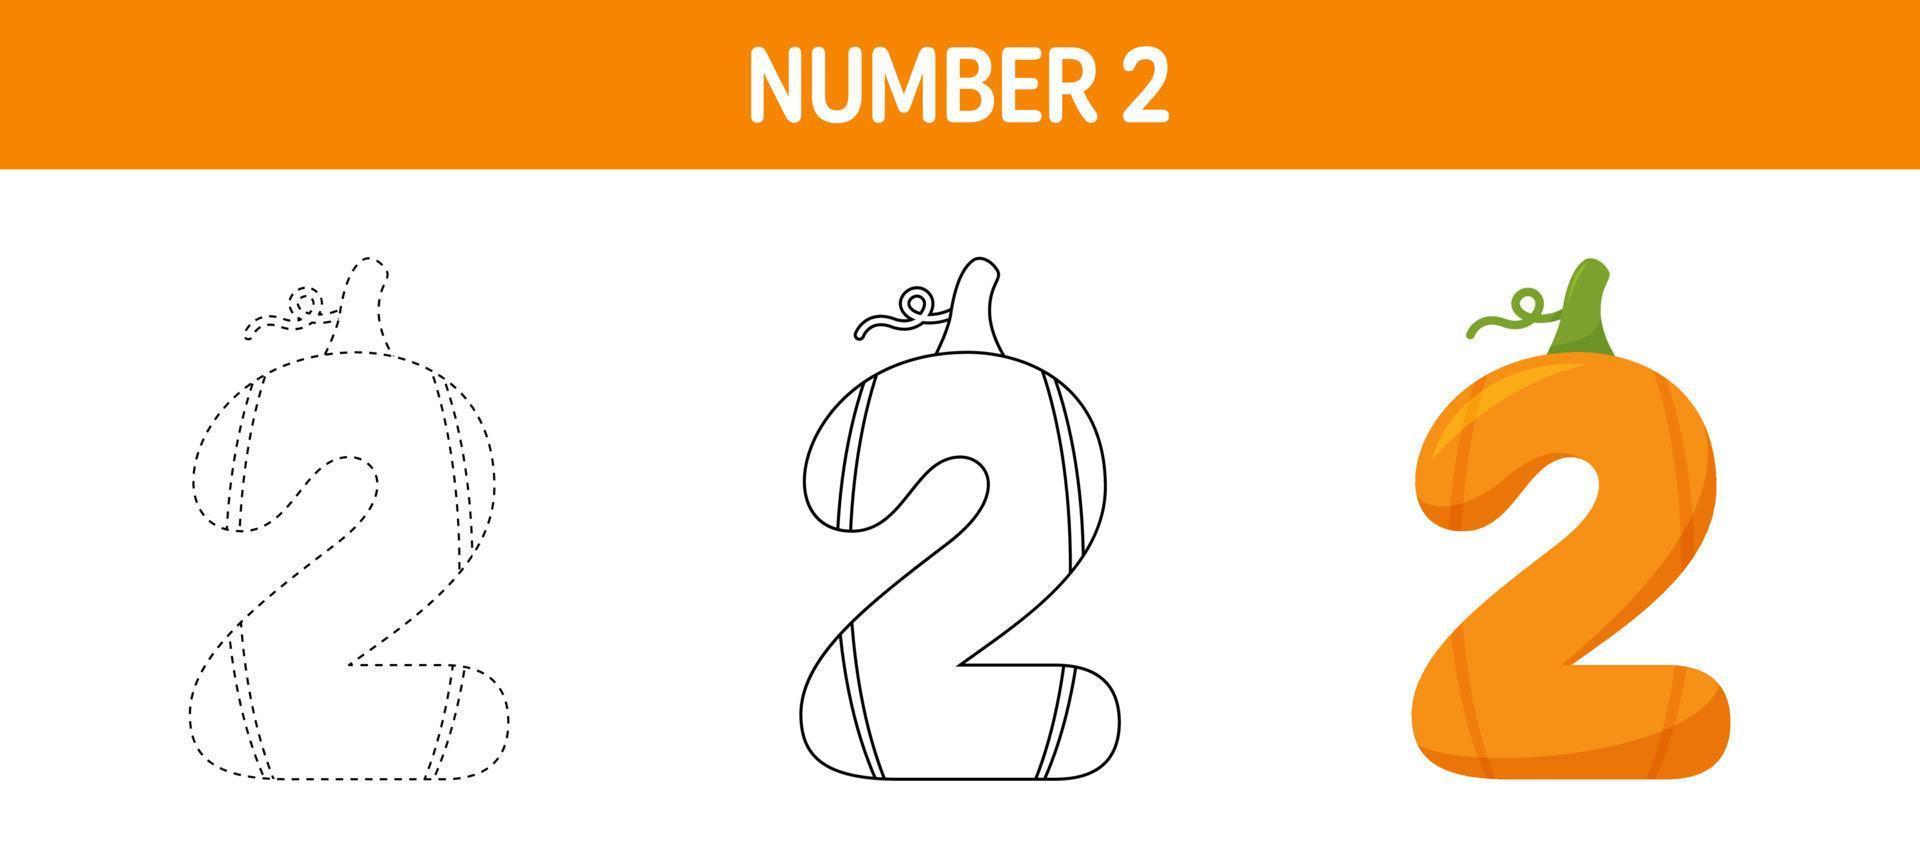 Number 2 Pumpkin tracing and coloring worksheet for kids vector